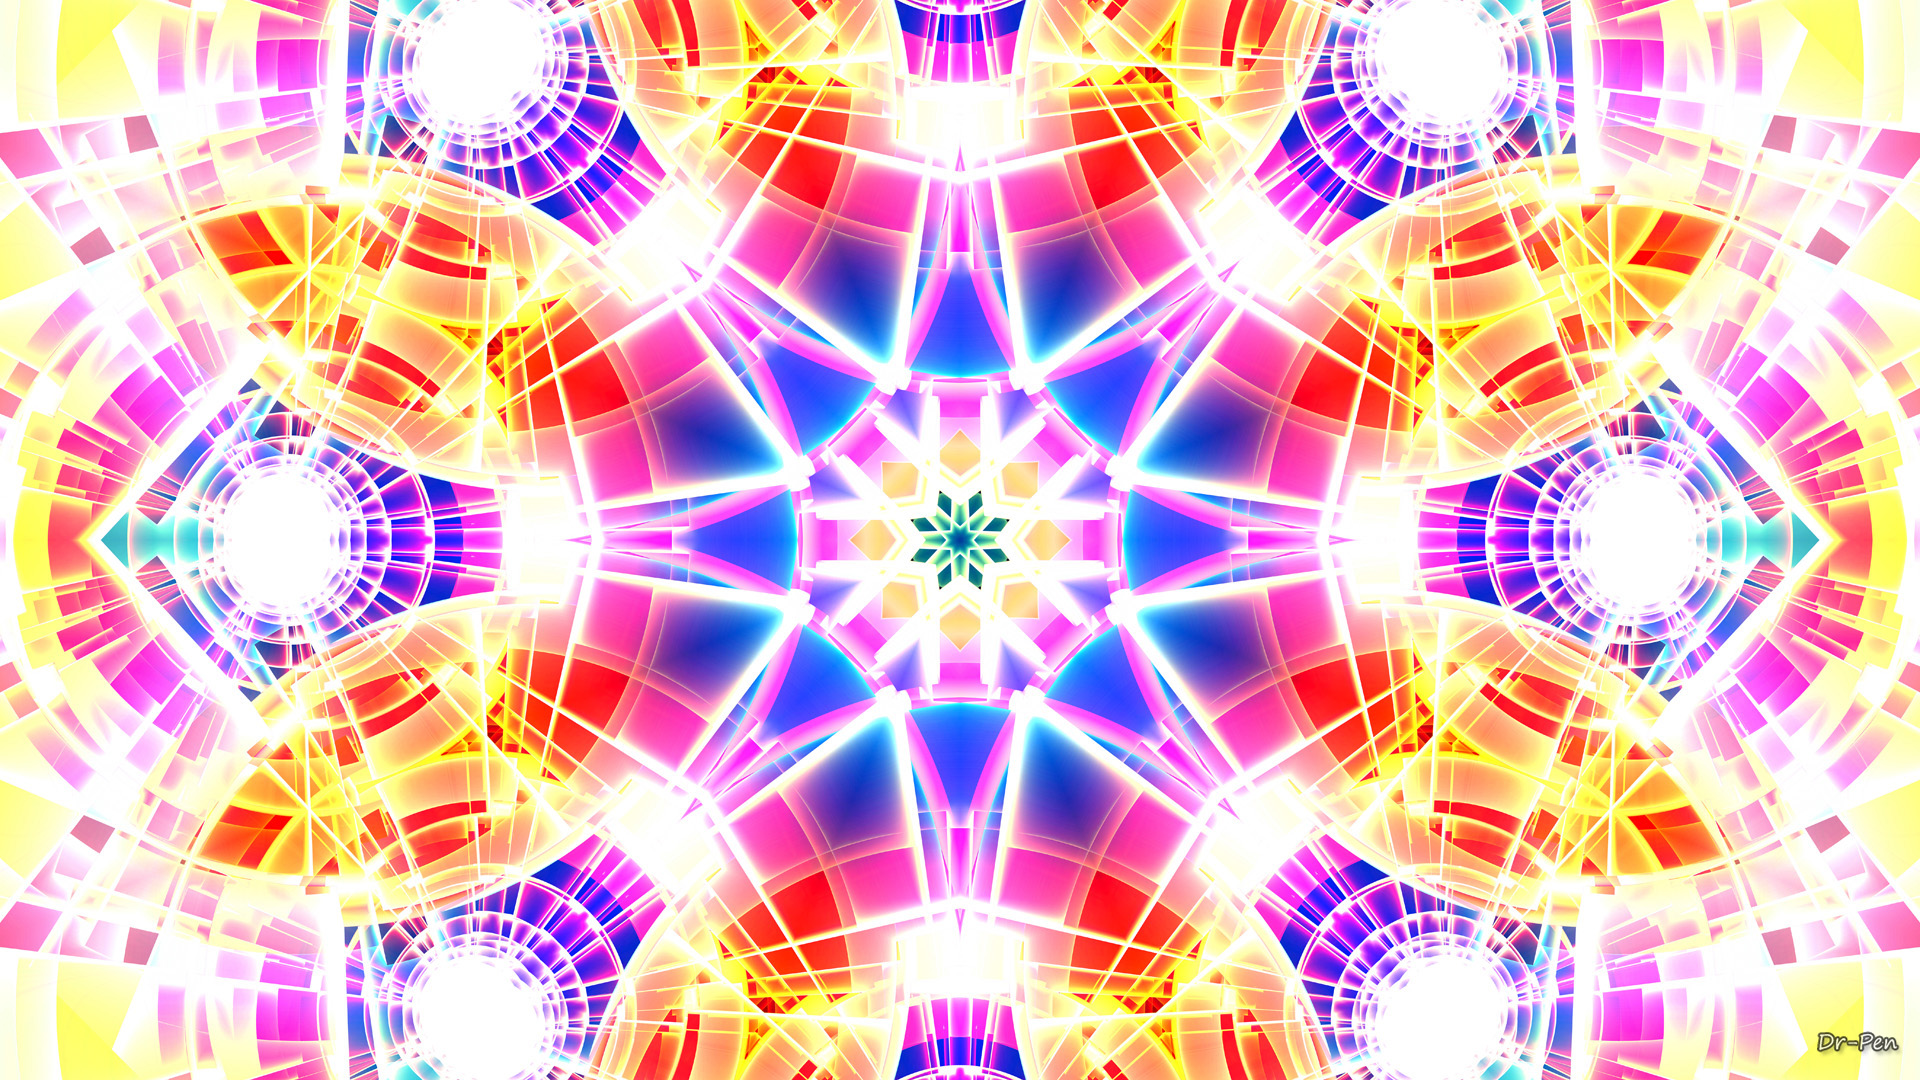 purple, bright, abstract, pattern, blue, colorful, colors, mandala, manipulation, orange (color), rainbow, red, spectrum, yellow